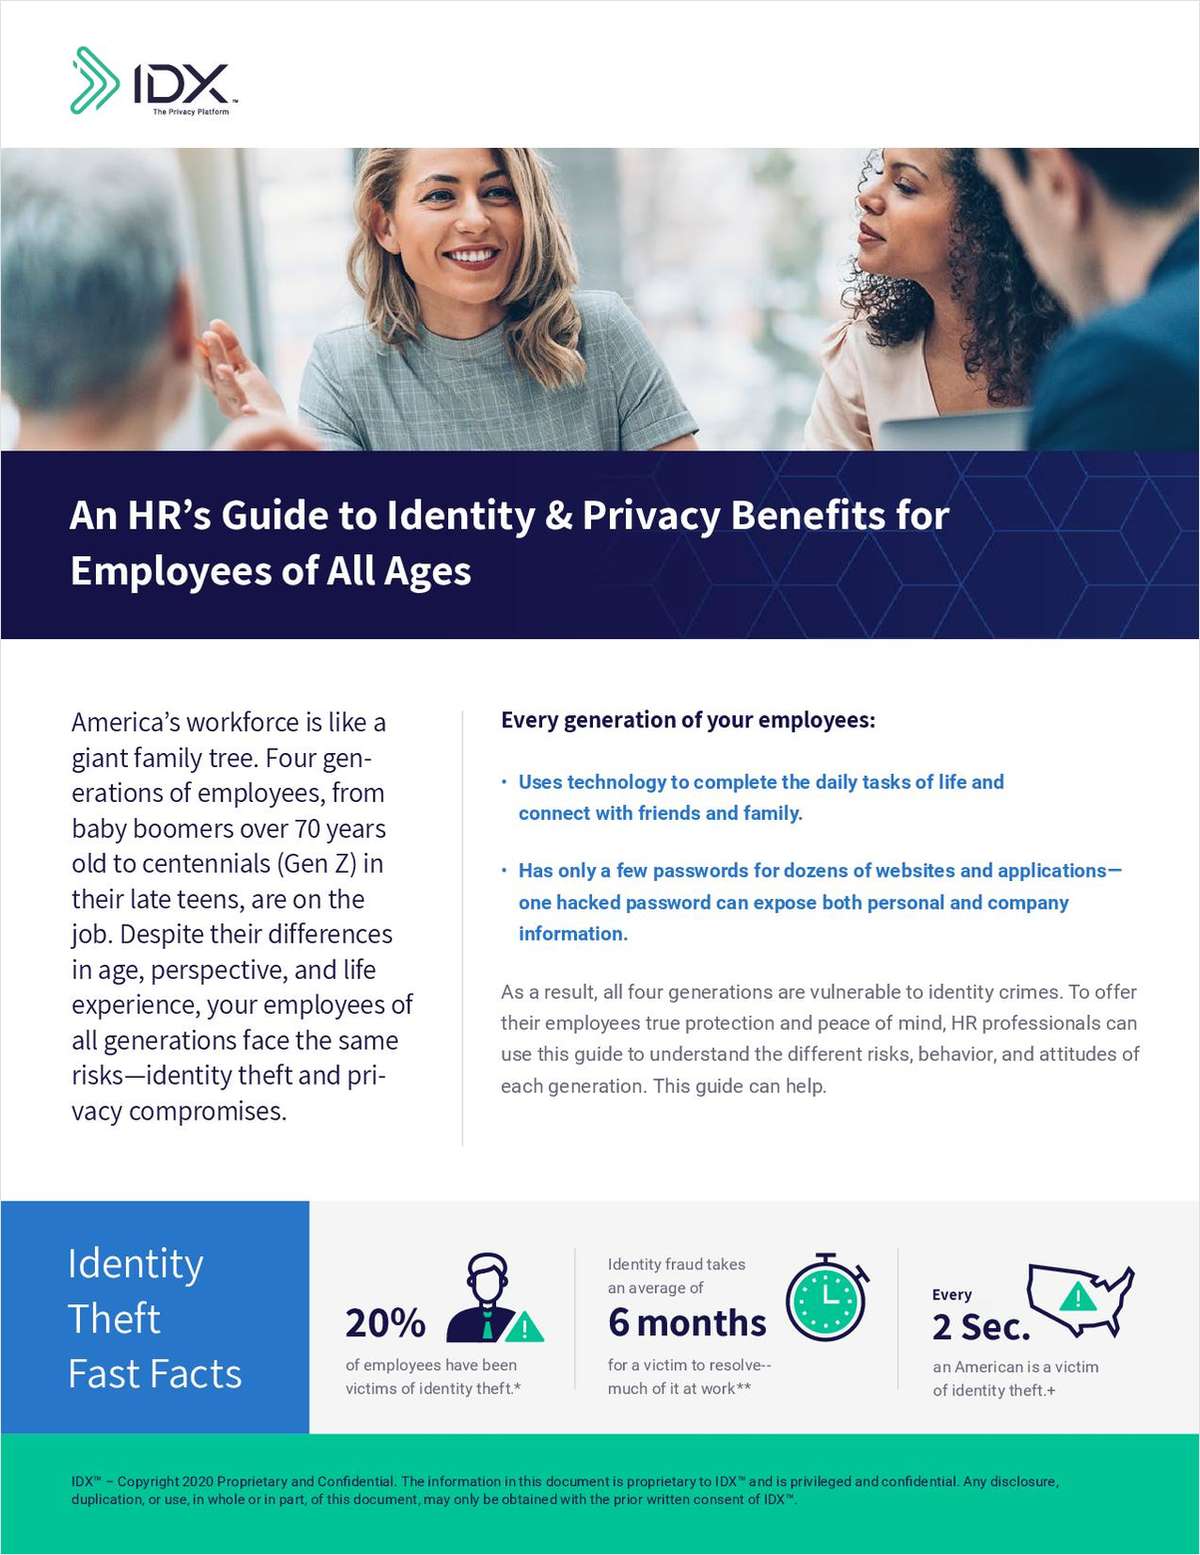 An HR's Guide to Identity & Privacy Benefits for Employees of All Ages